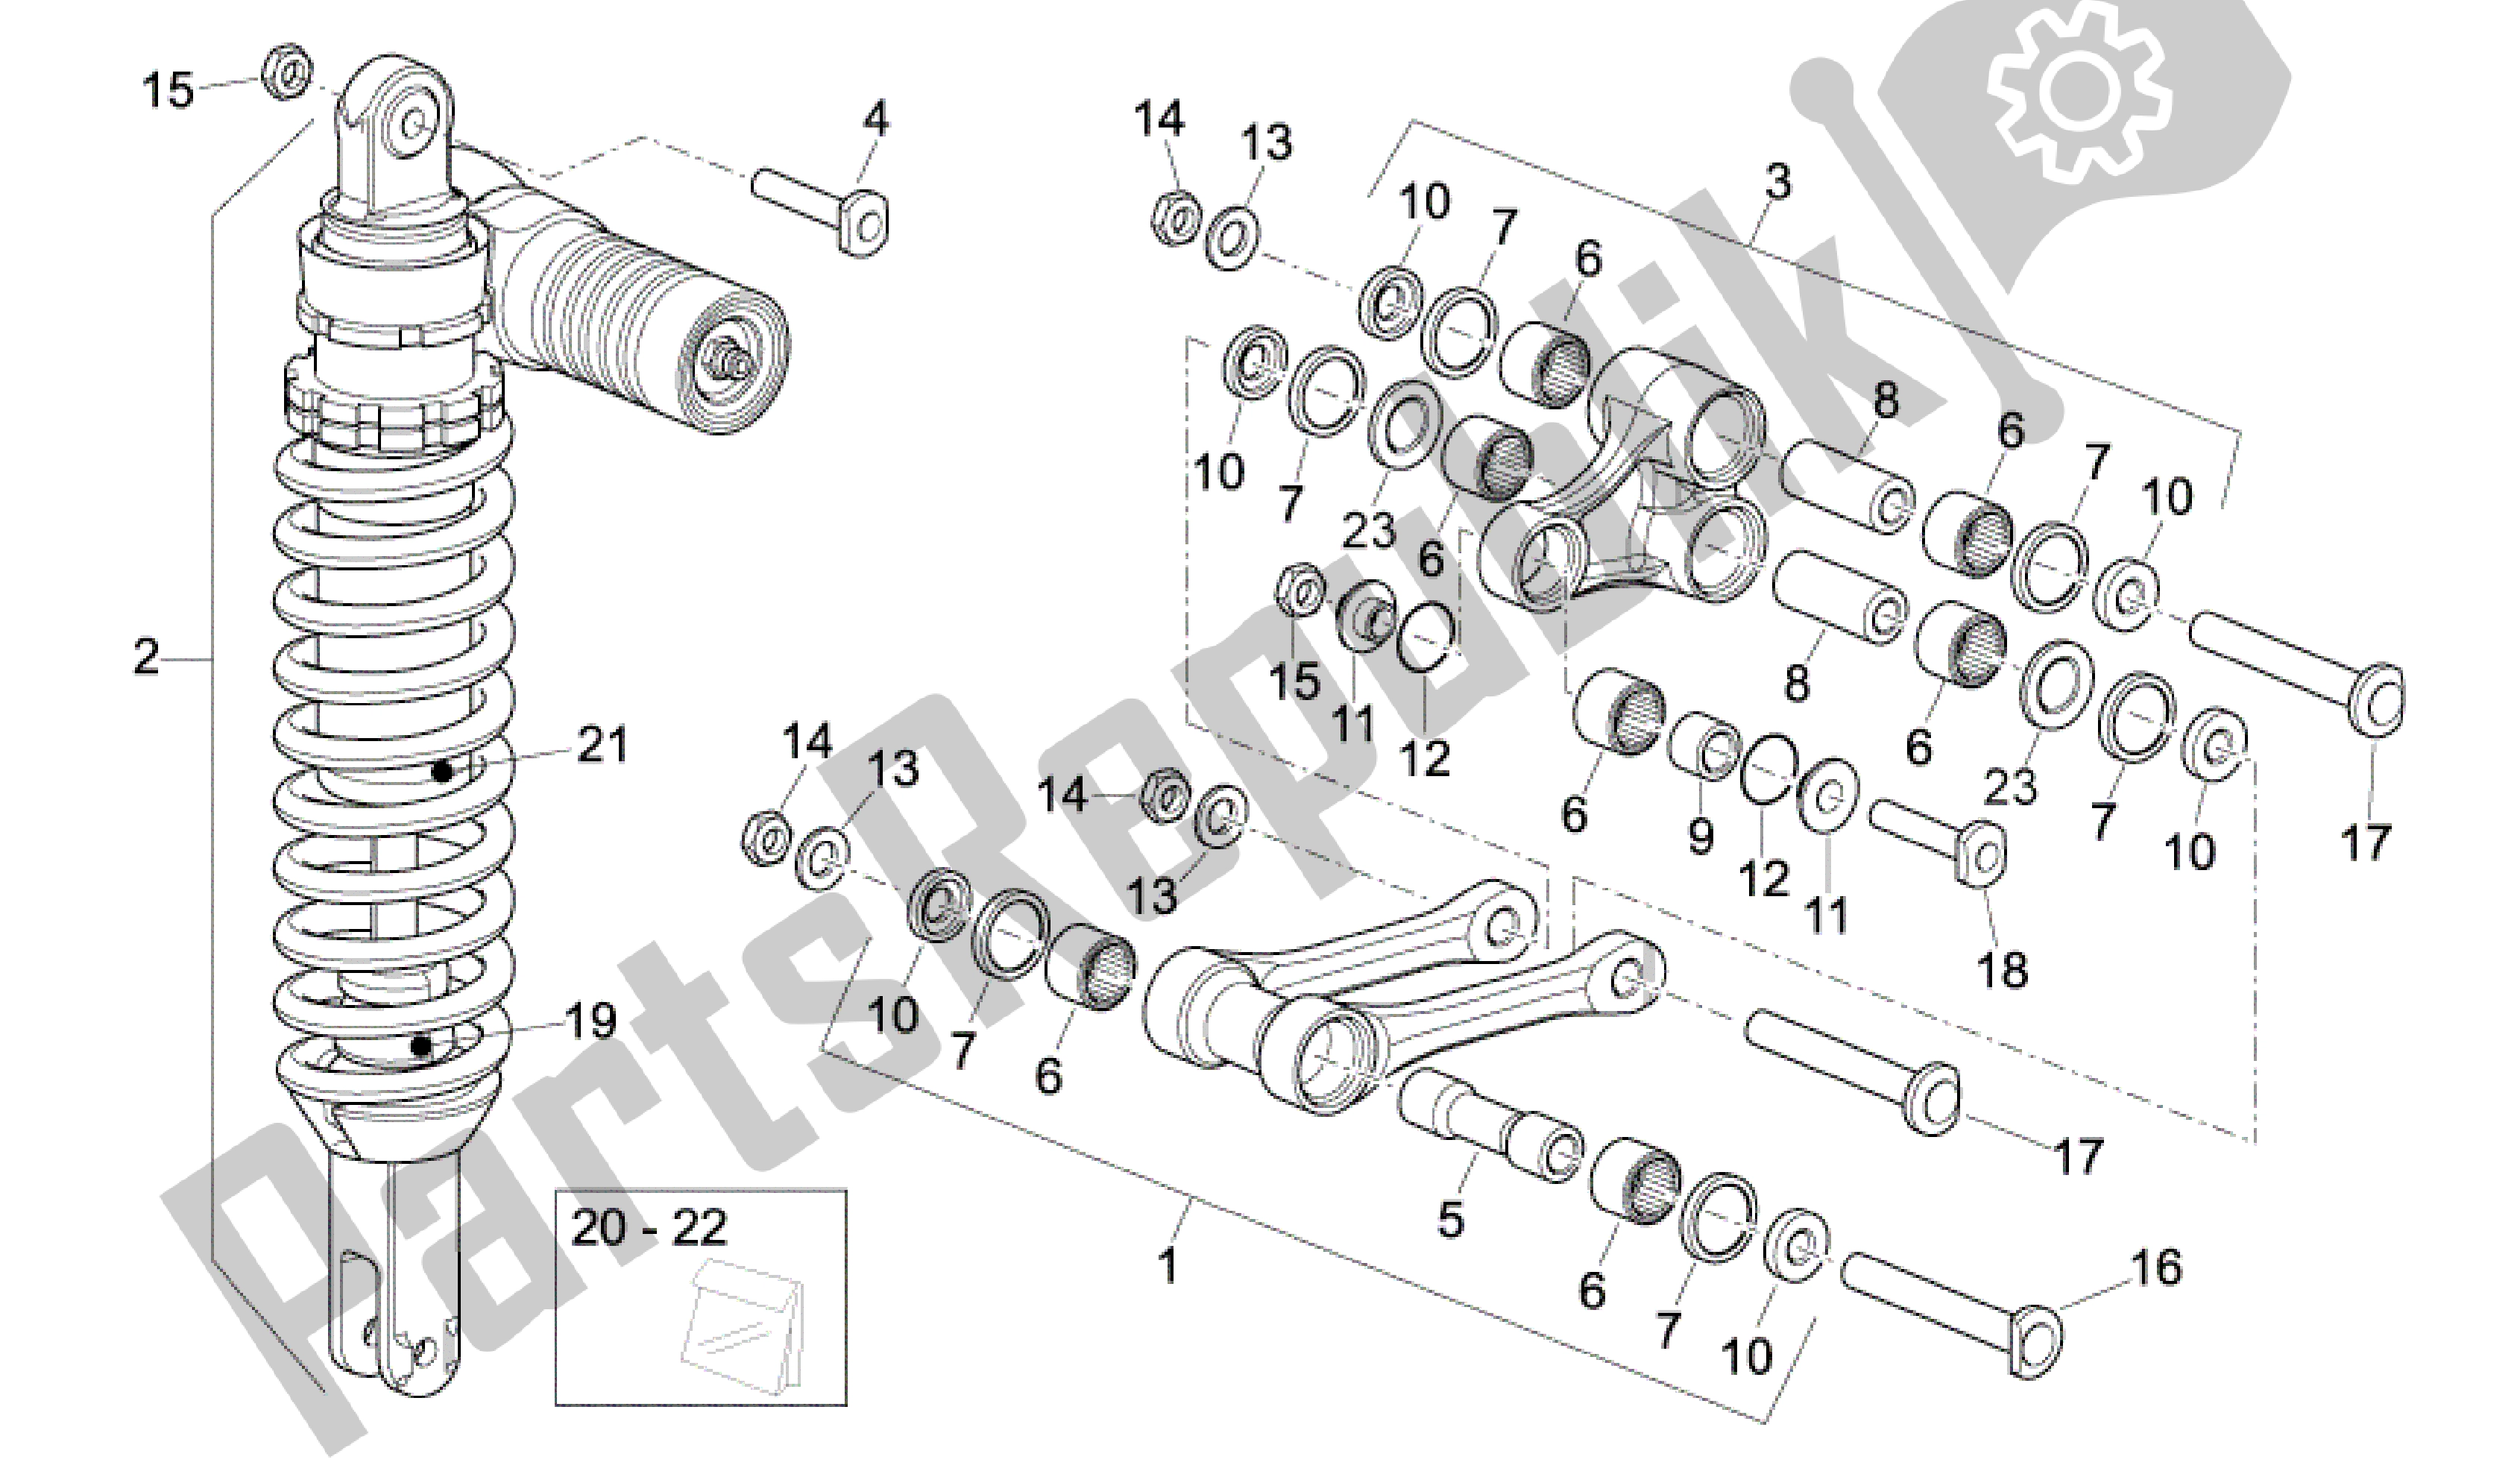 All parts for the Rear Shock Absorber of the Aprilia SXV 550 2009 - 2011